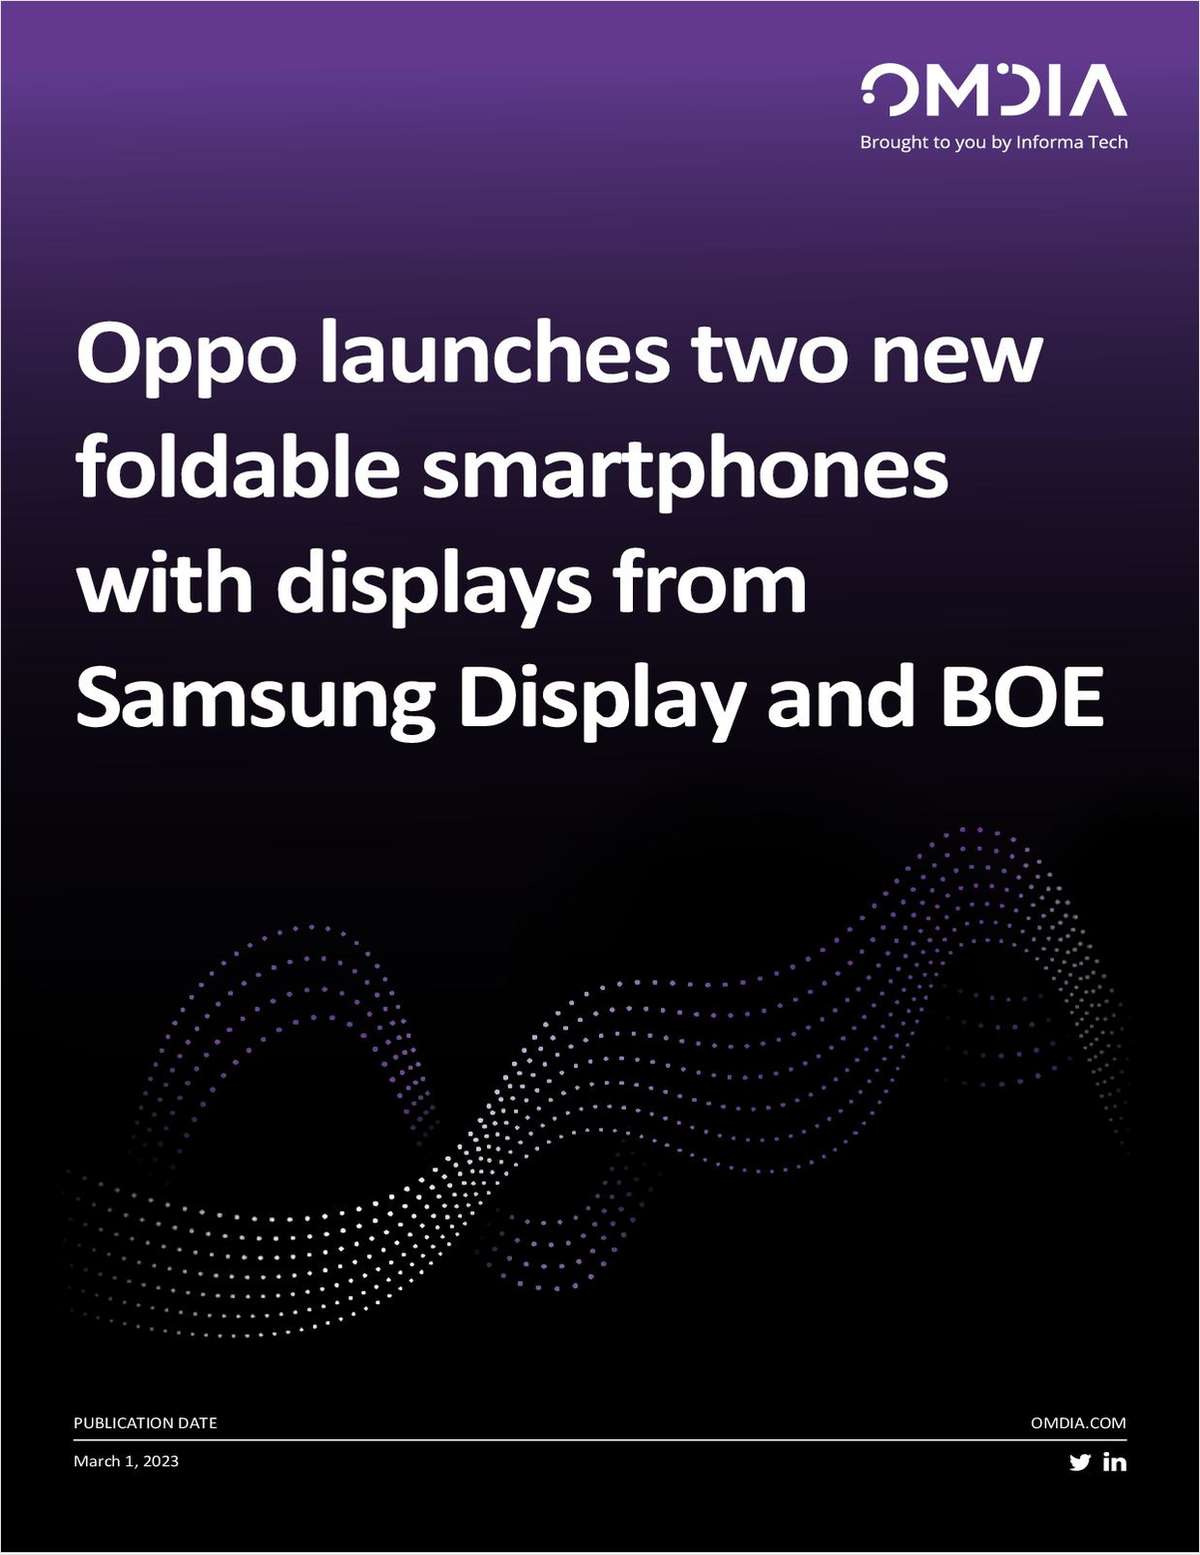 Oppo launches two new foldable smartphones